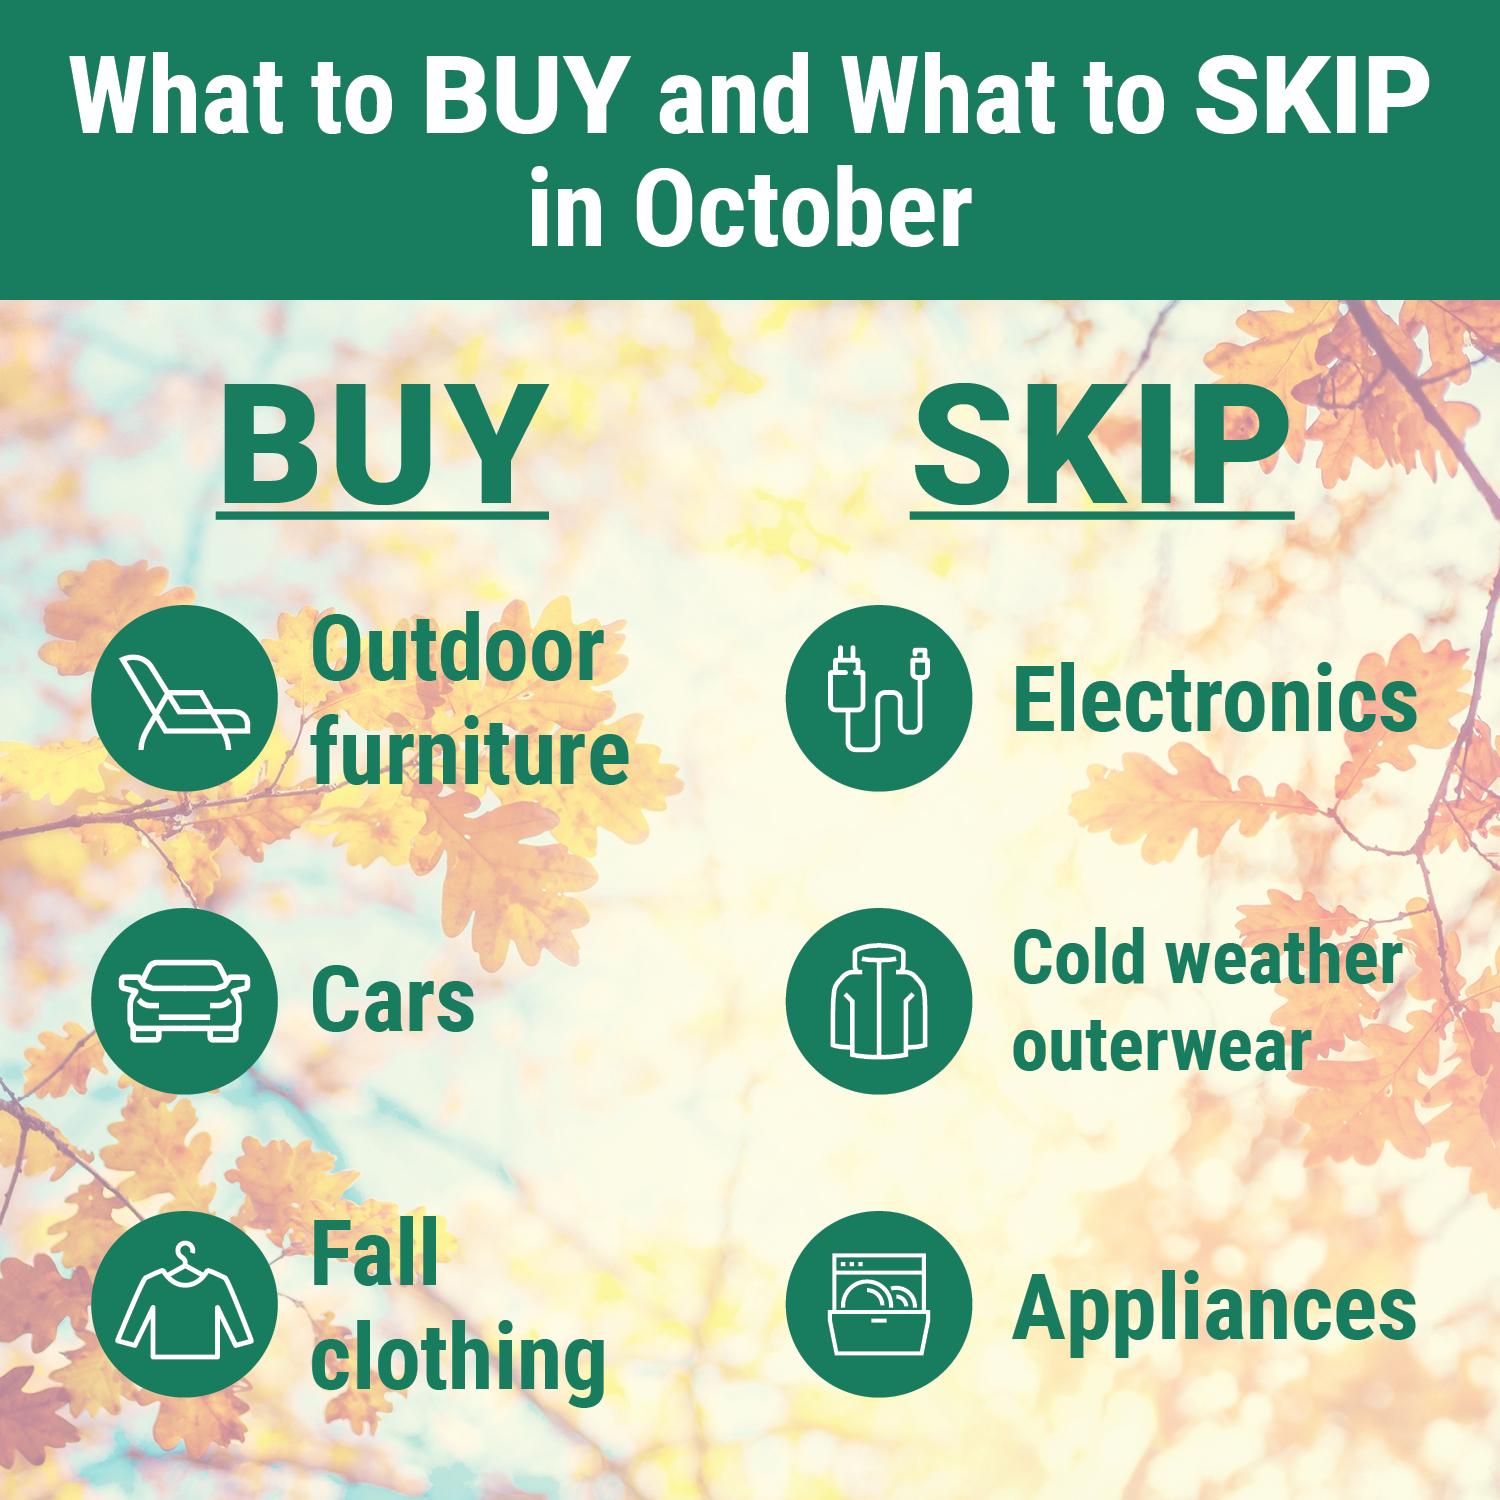 What to buy and what to skip in October